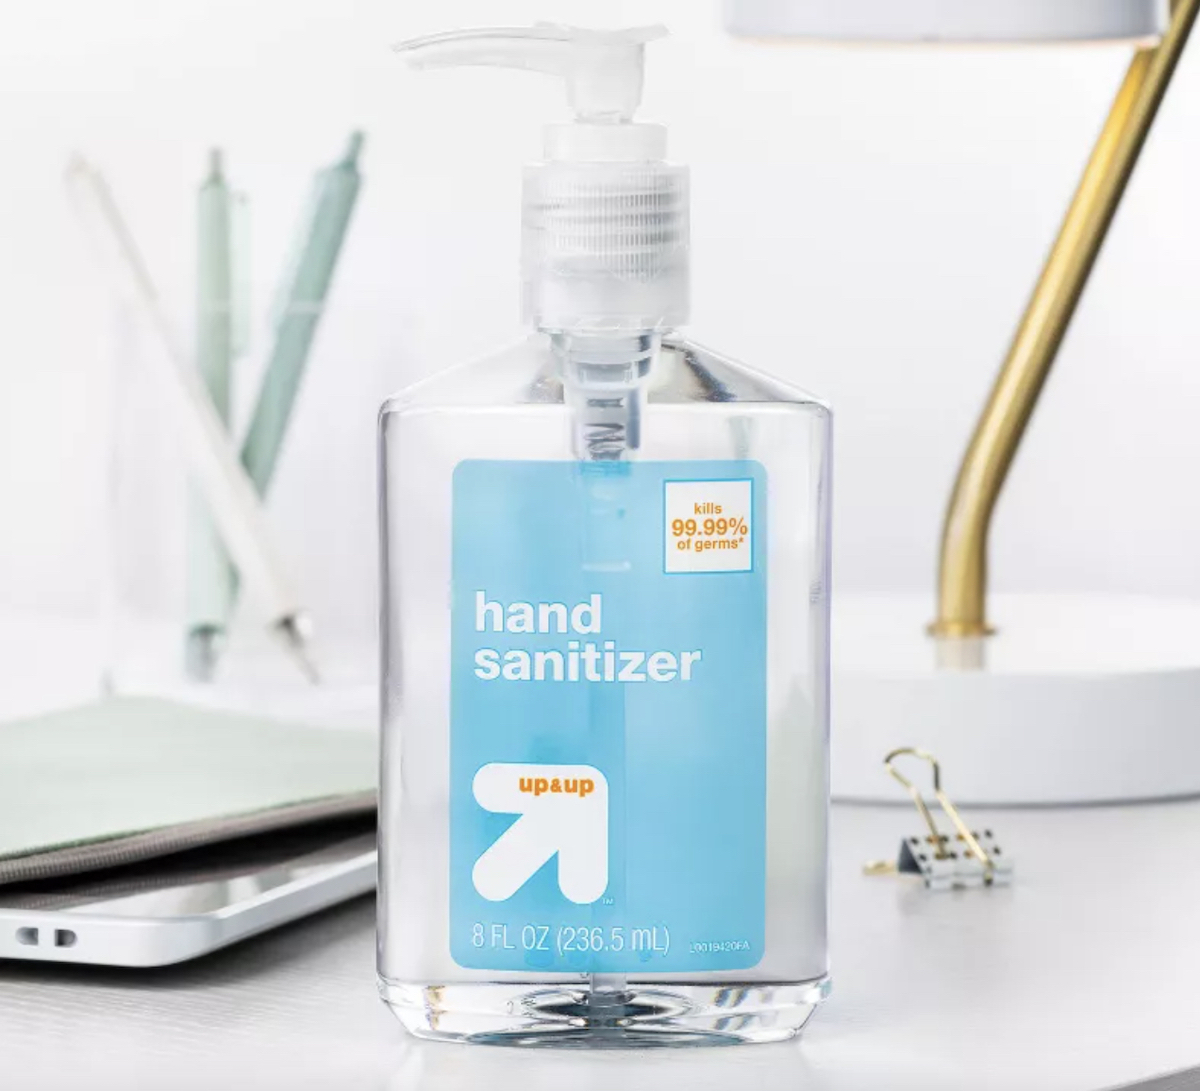 up and up hand sanitizer bottle on desk, one of the best teacher gift ideas